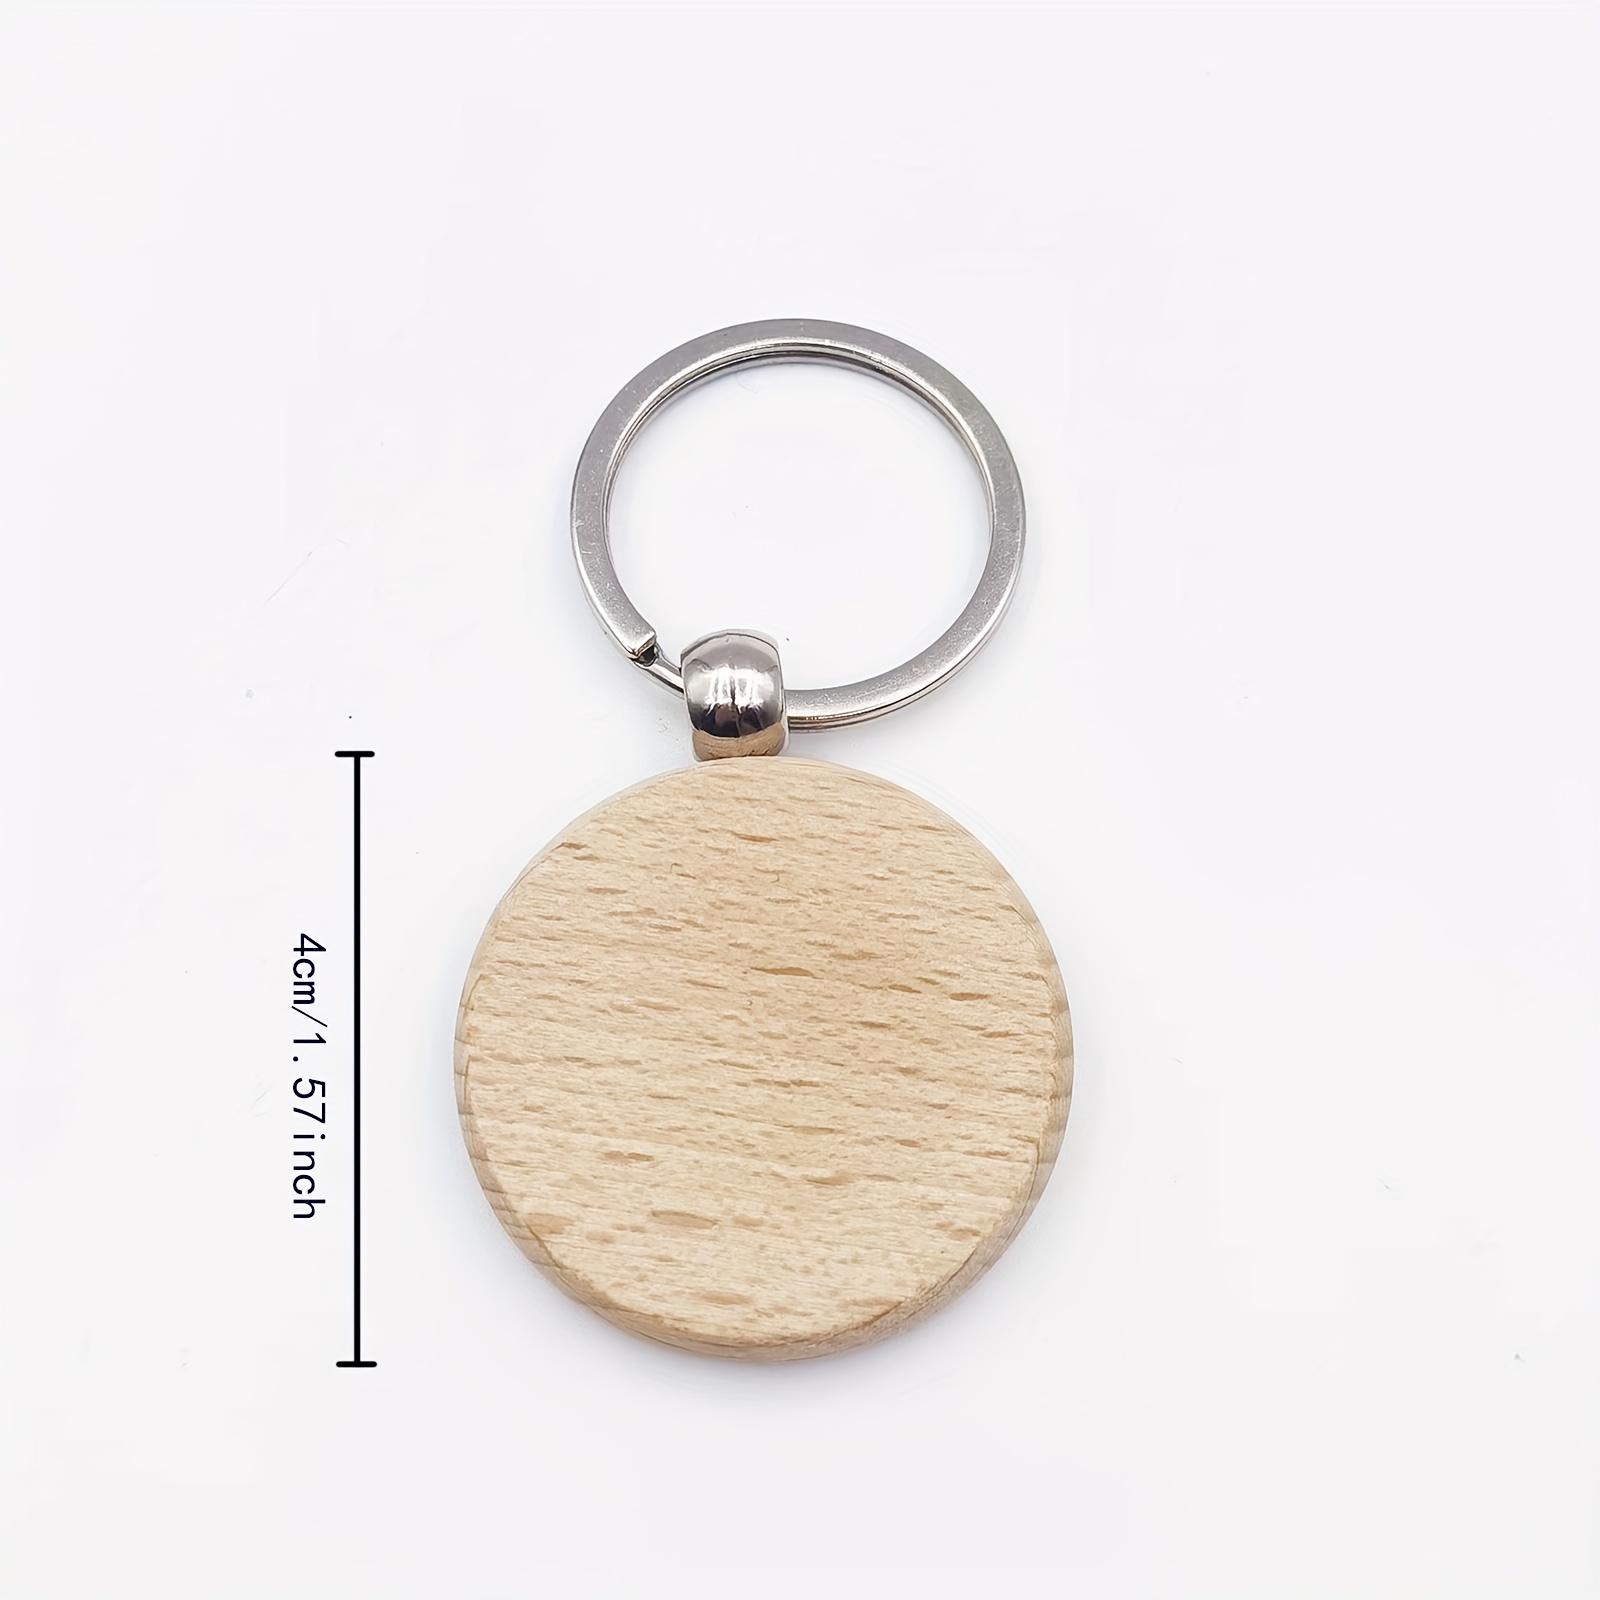 Wood Keychain Blanks, Round, Oval, Heart, and Rectangle for Crafts